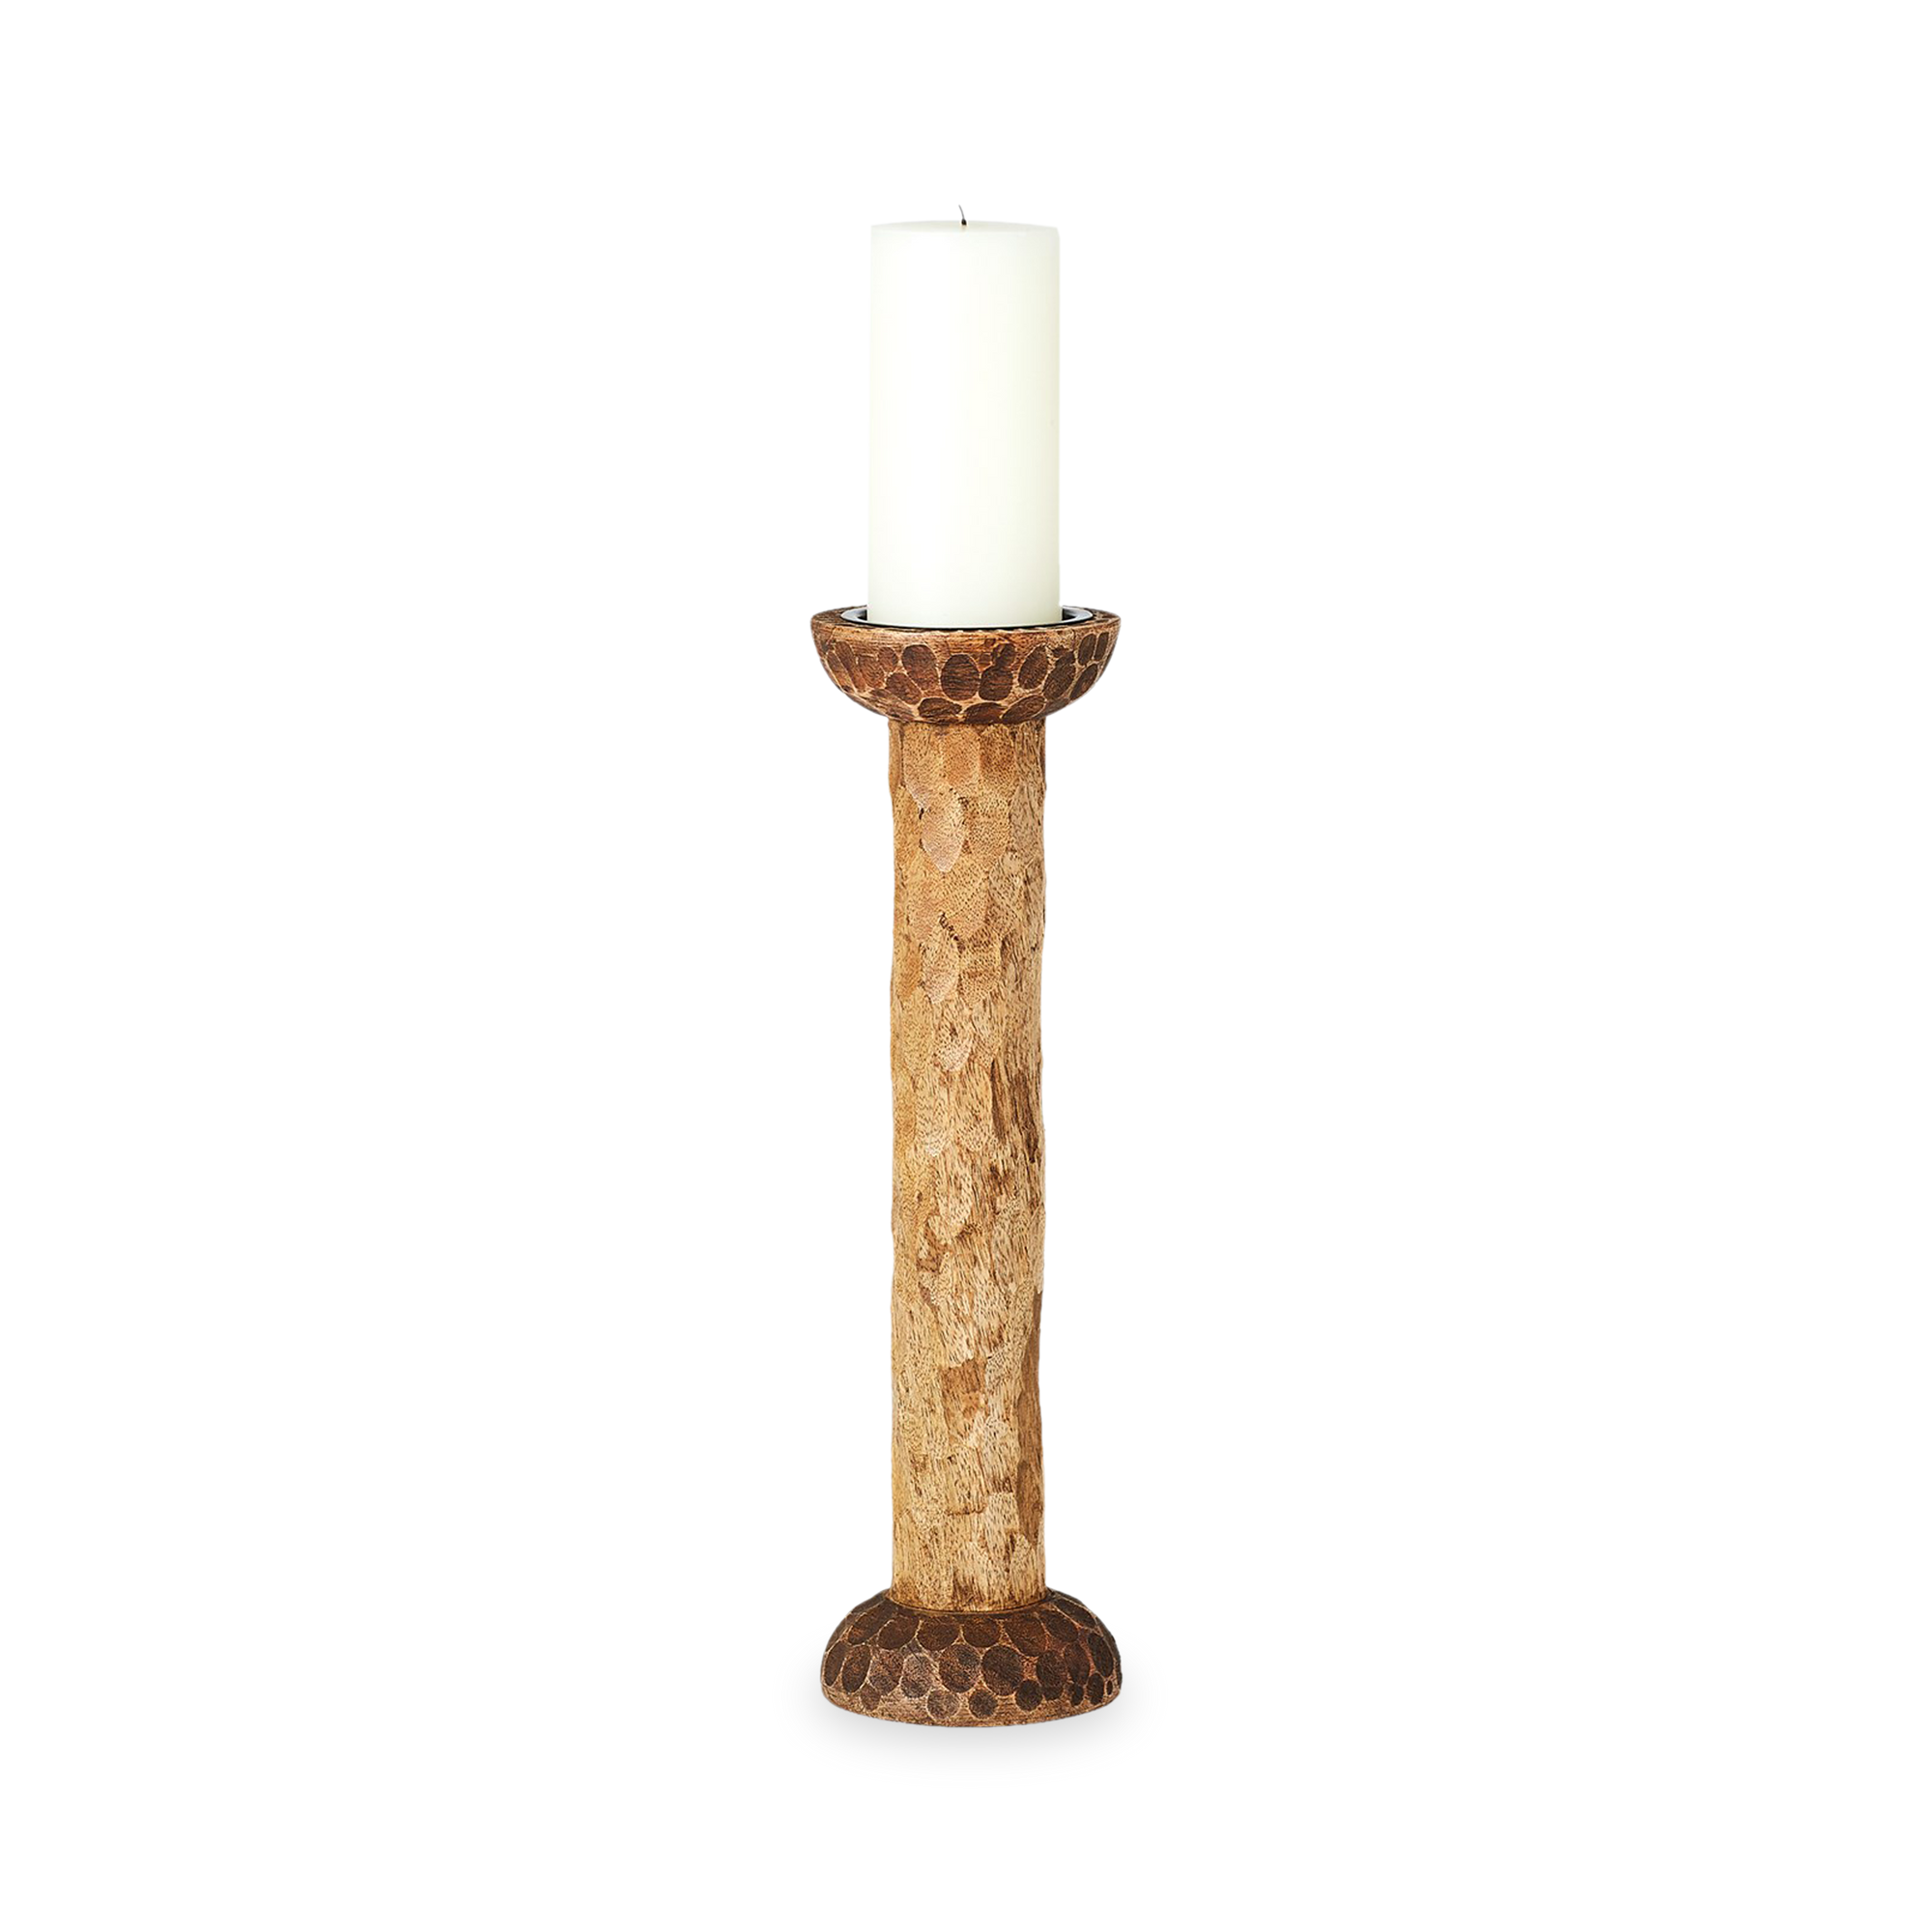 The Abais Pillar Candleholders draw their inspiration from African carvings highlighted through their organic tones.